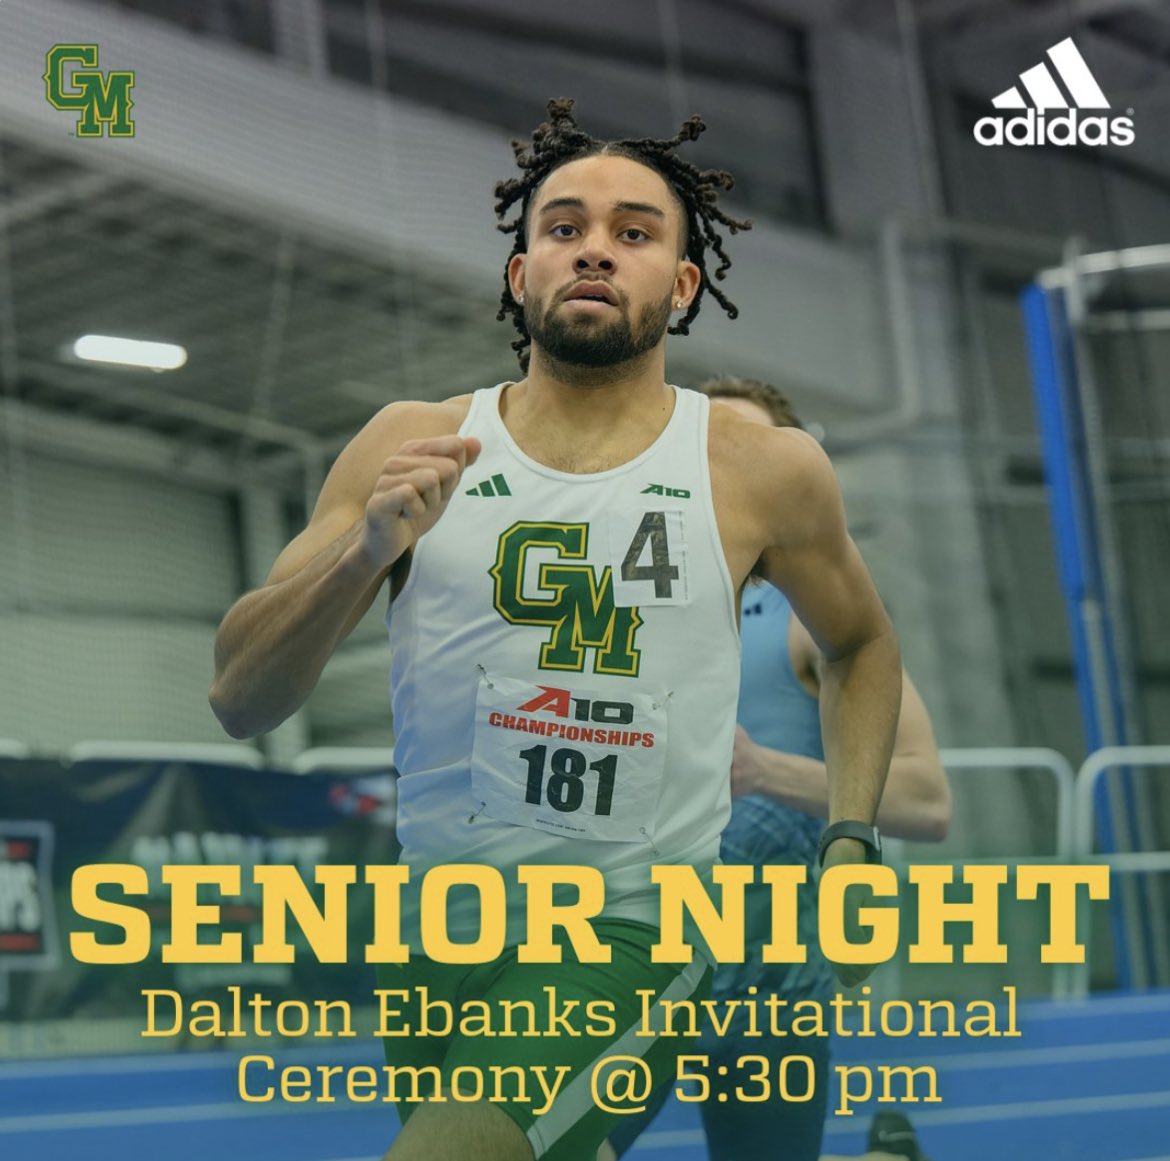 A special day for our seniors, we will thank them for their time at Mason🔰 Day 2 of Dalton Ebanks Invitational begin at 10 am Live Stats: cagstiming.com